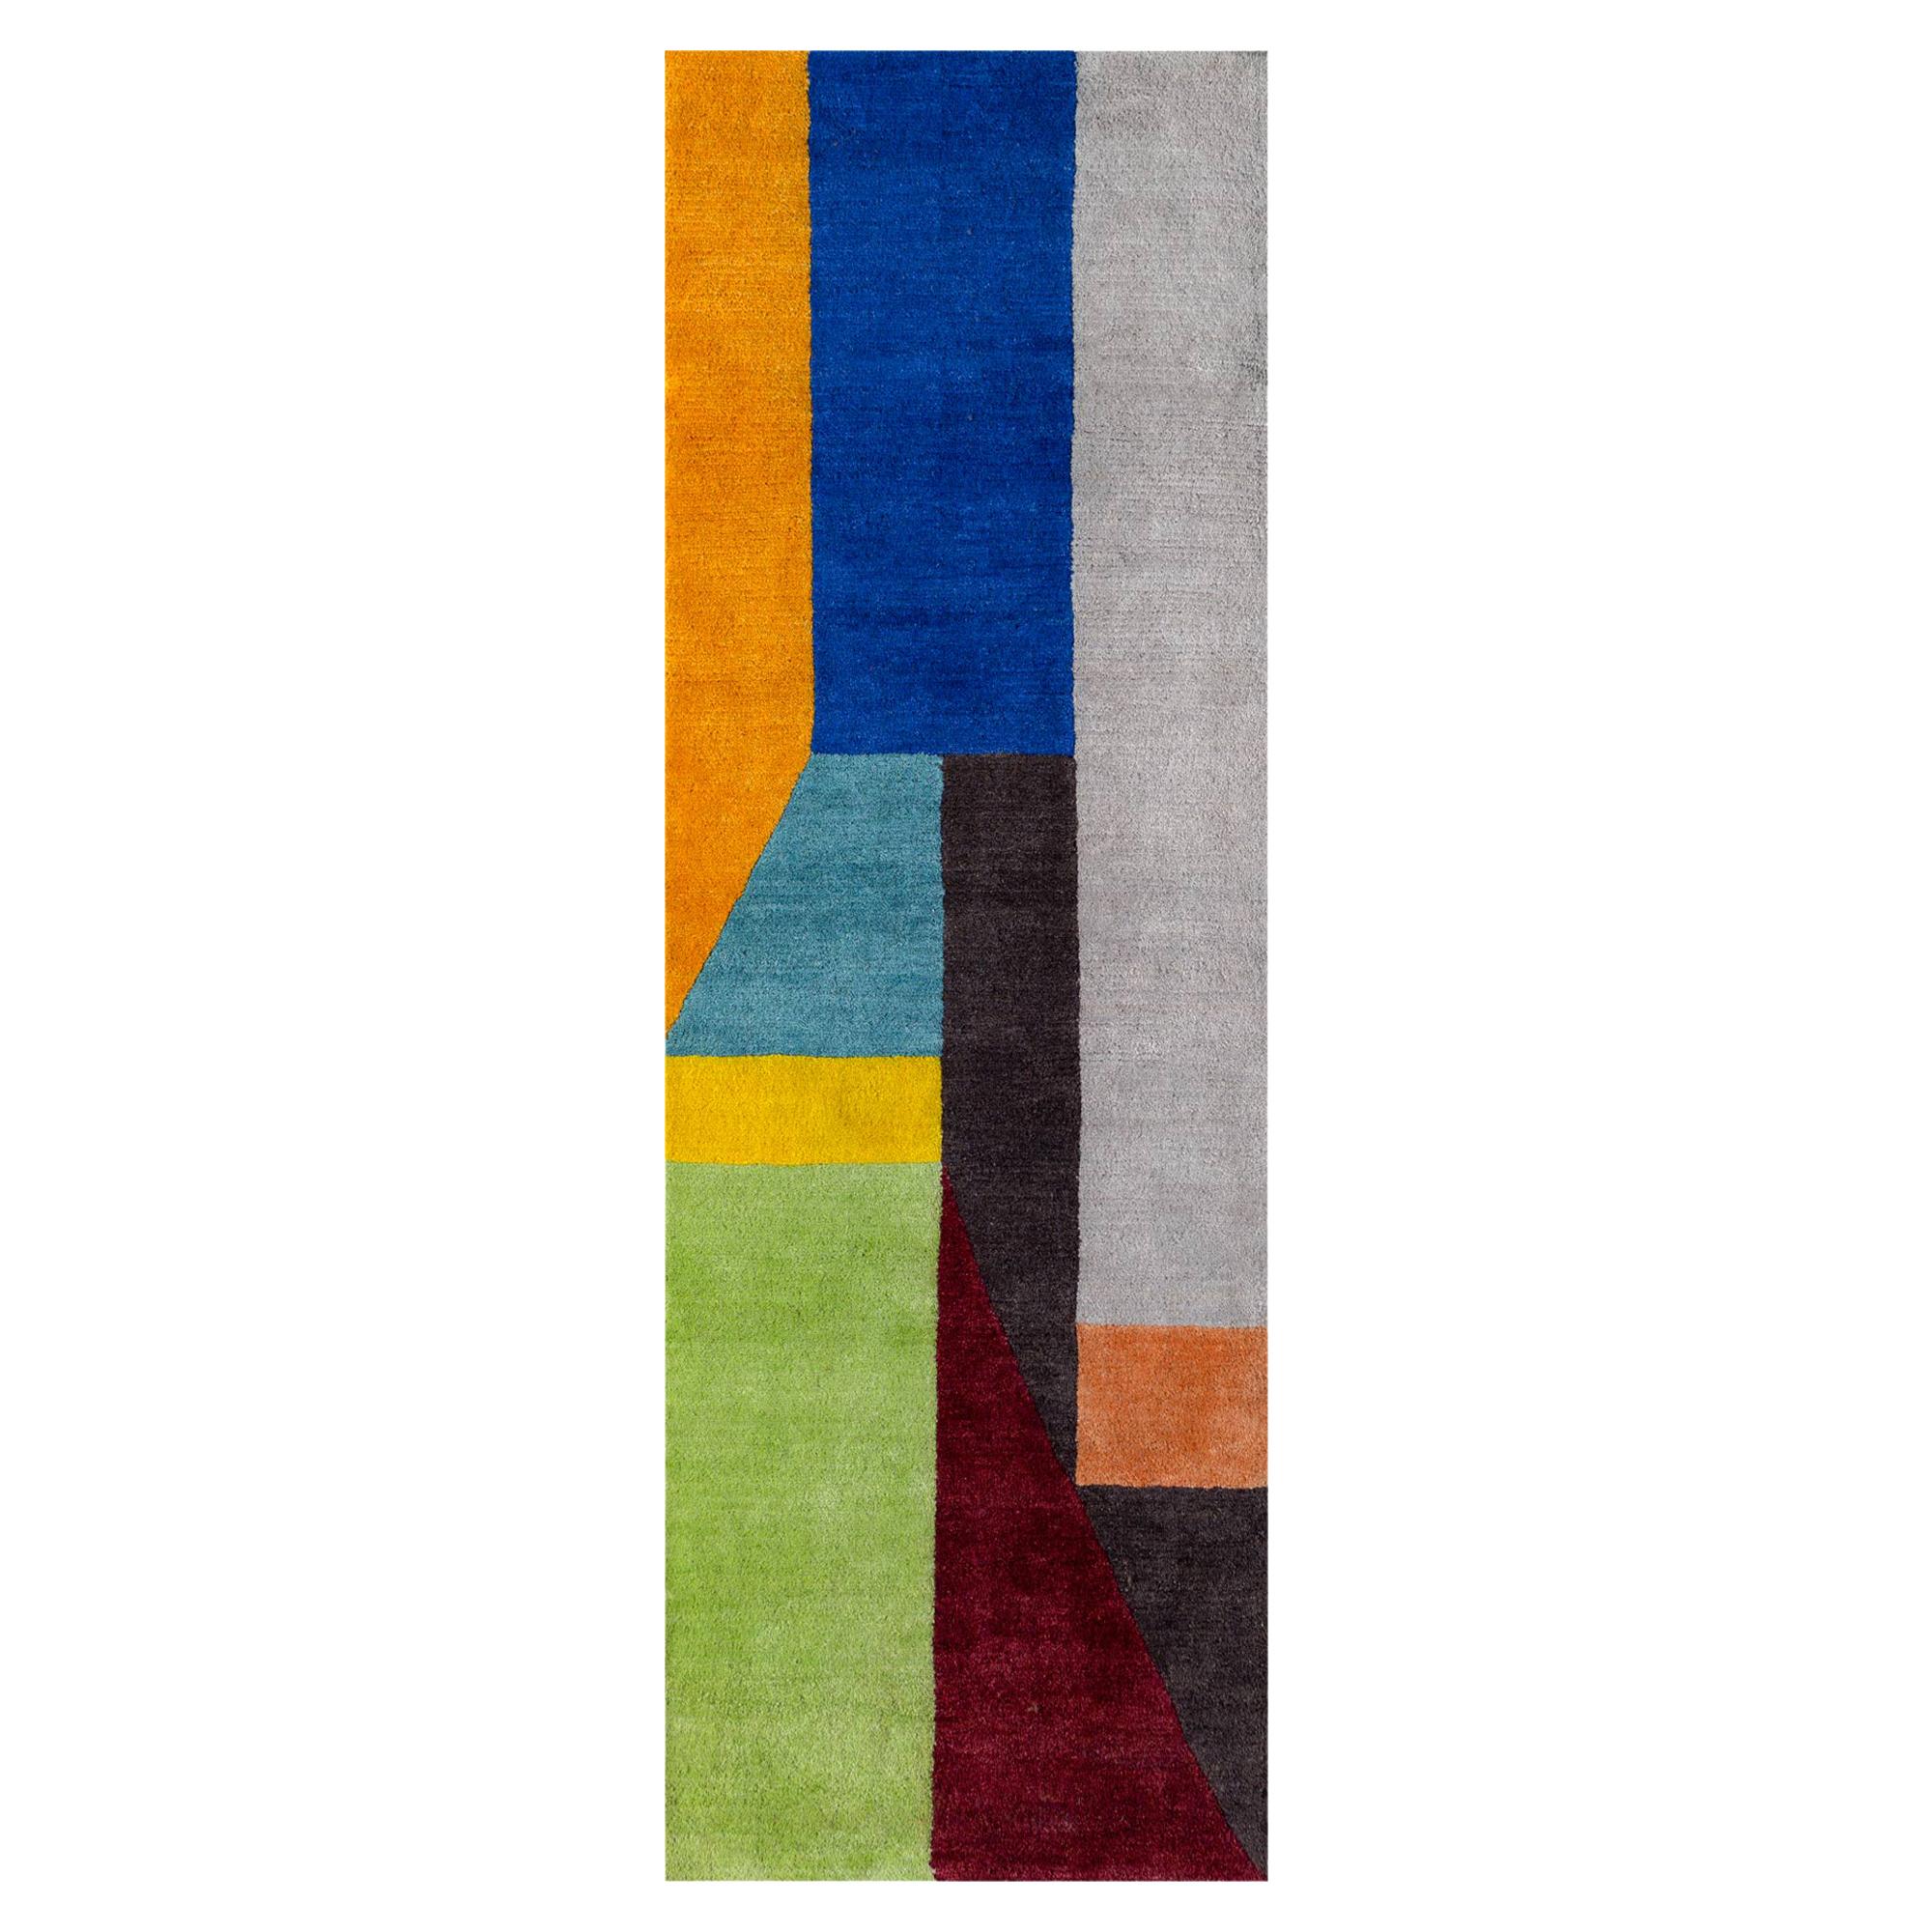 CEM1 Woollen Carpet by Chung Eun Mo for Post Design Collection/Memphis For Sale